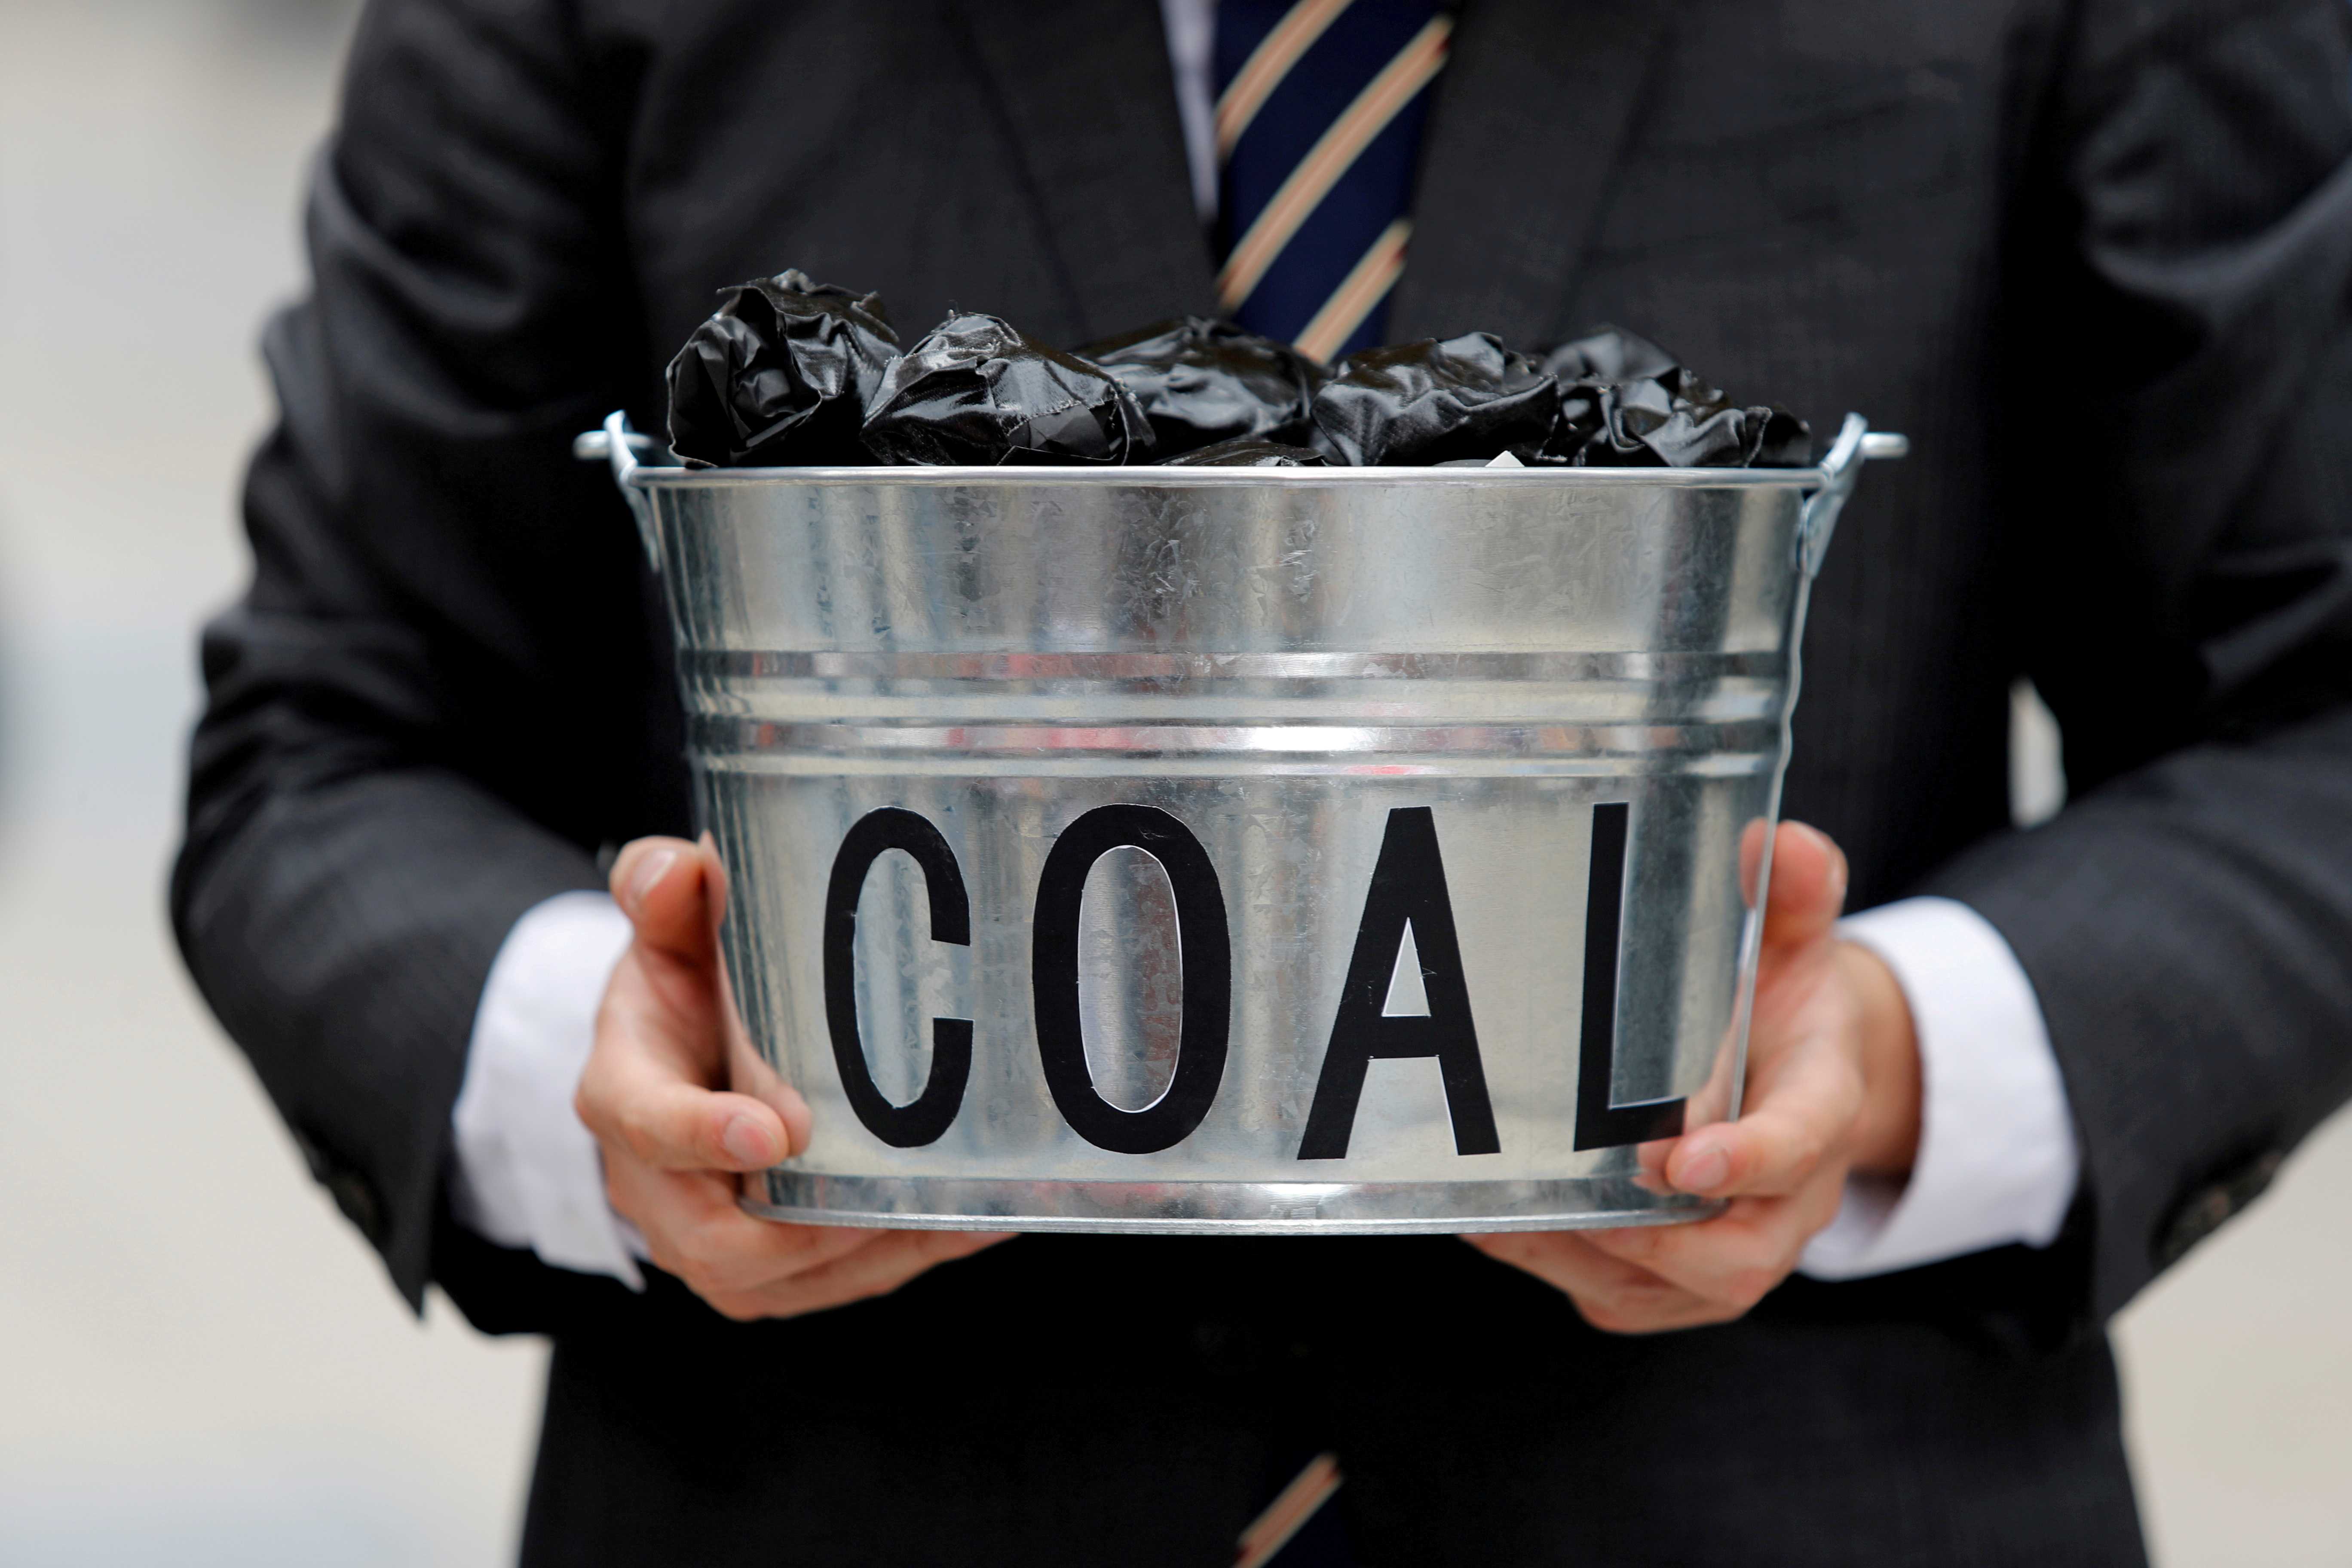 A protester holds a bucket of coal during a demonstration demanding Japan to stop supporting coal at home and overseas, at the G20 Summit in Osaka, Japan, June 28, 2019. REUTERS/Jorge Silva